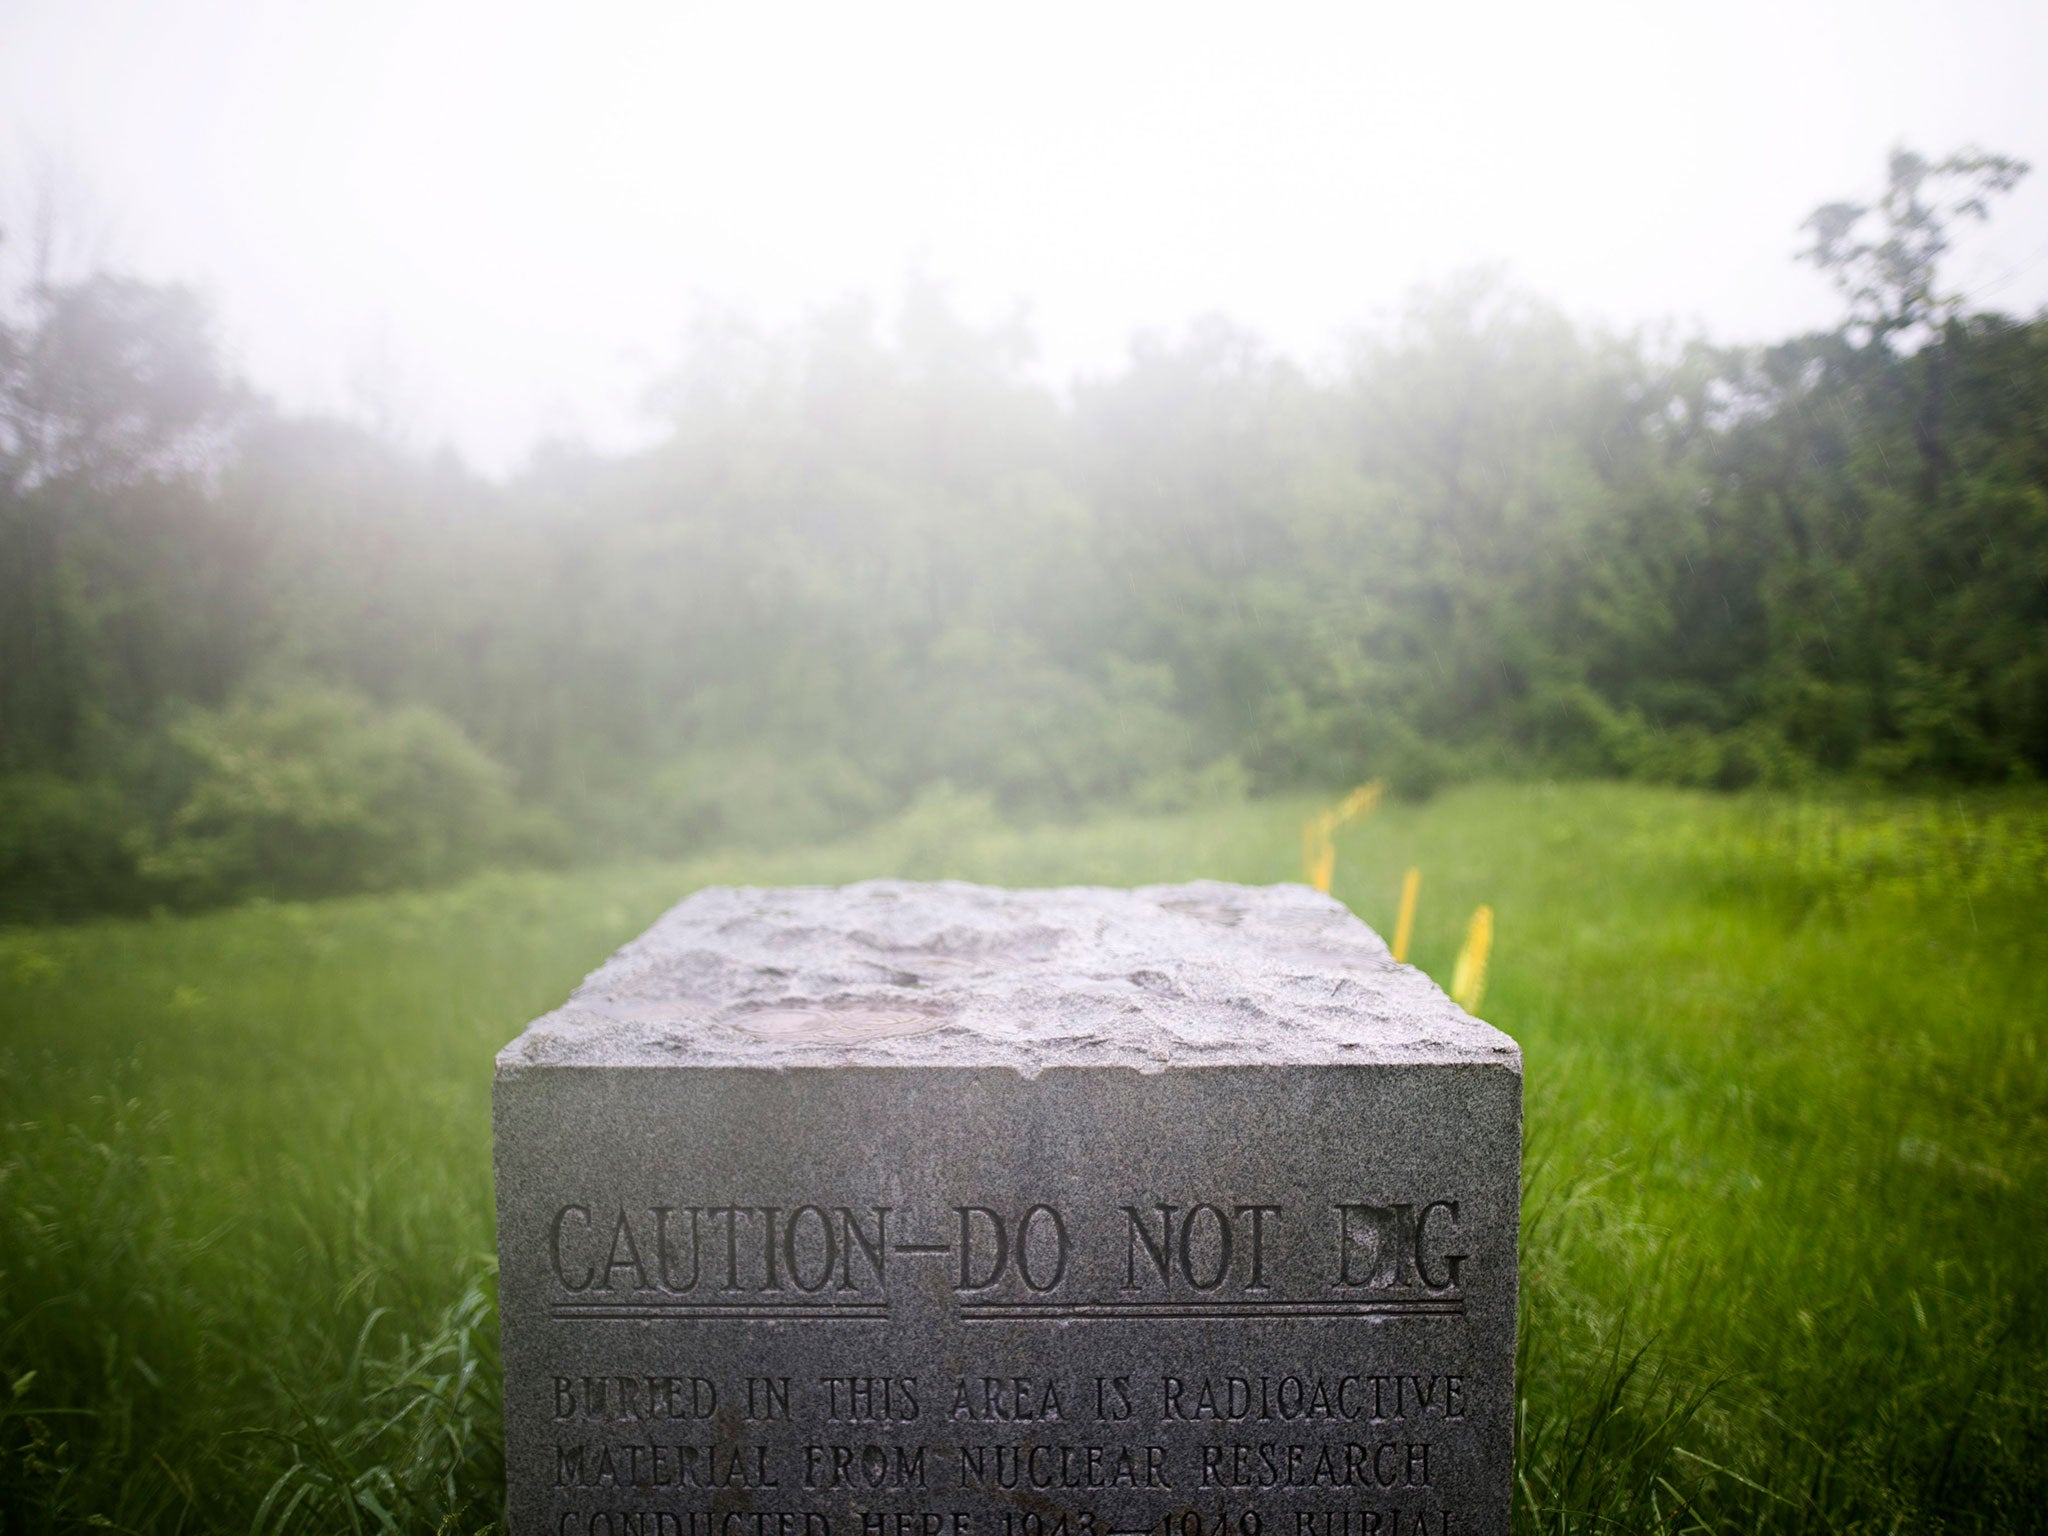 A concrete marker at a site known as 'Plot M,' which is located in a public park in suburban Chicago, warns visitors that radioactive waste from the Chicago Pile (the world's first nuclear reactor), as well as other nuclear experiments, is buried beneath the soil in Red Gate Woods, Illinois